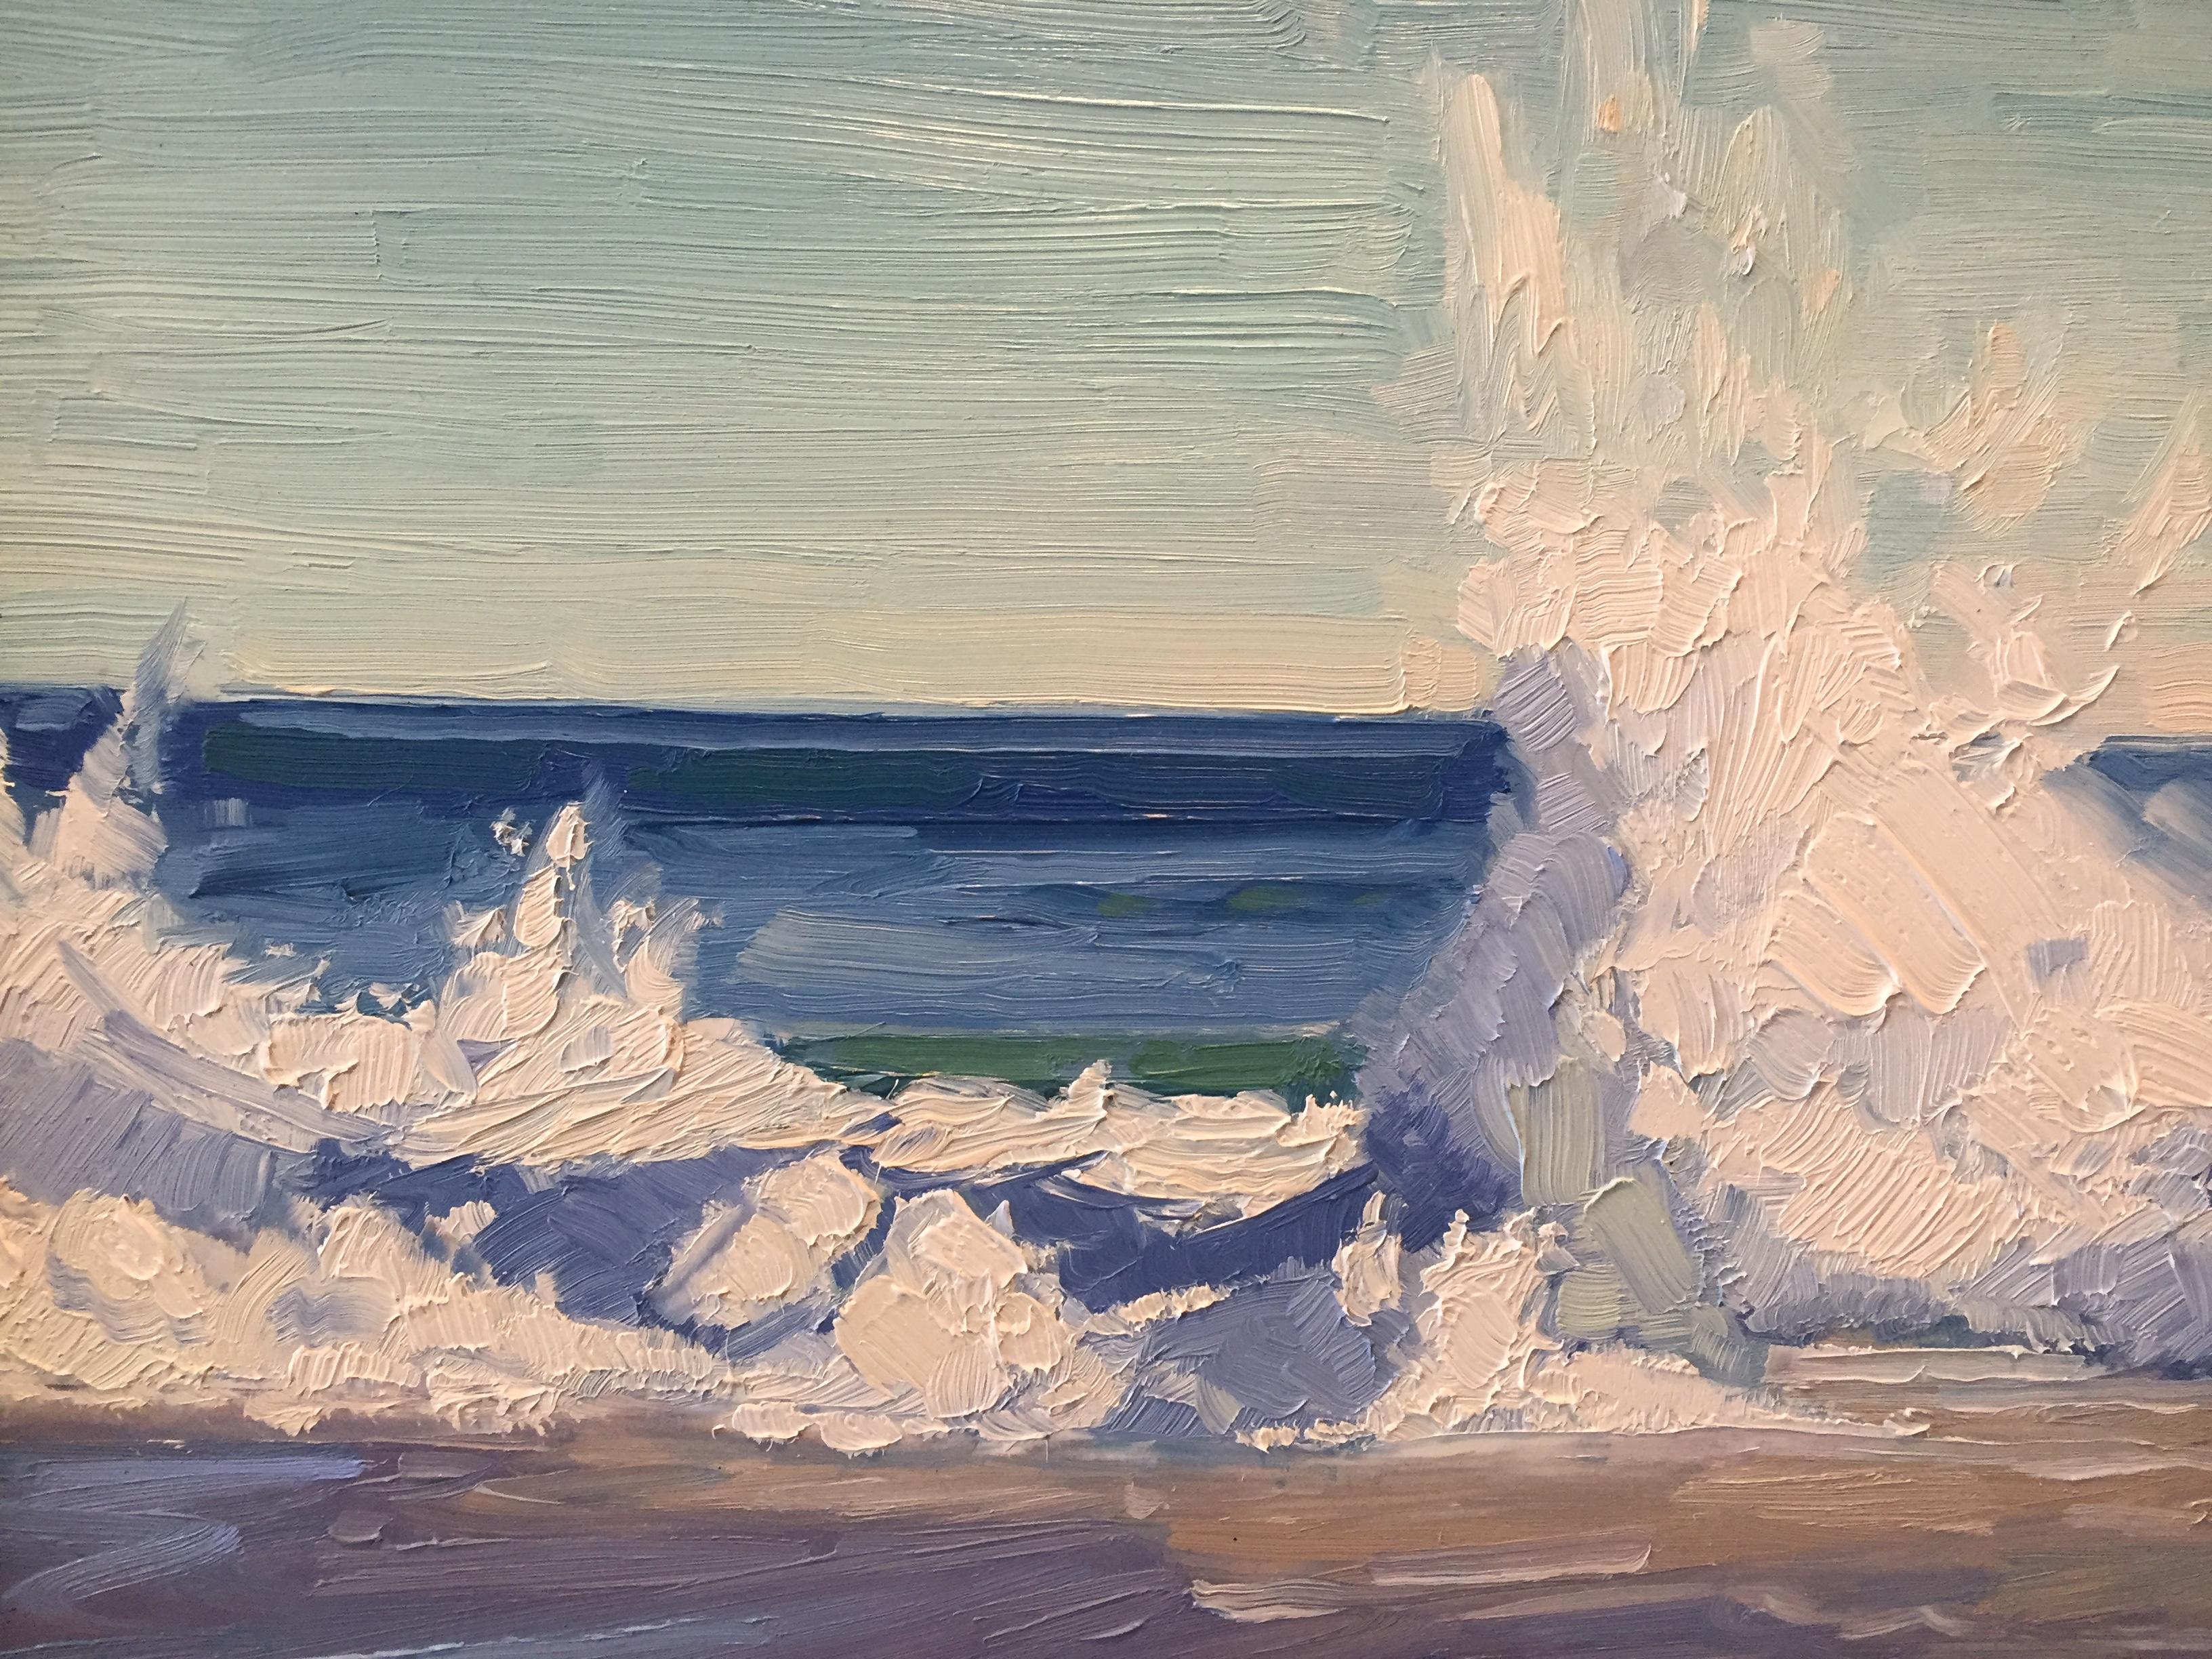 An oil painting of the ocean breaking onto shore. Painted en plein air in Sagaponack, NY.  

22 x 26 inches framed.

Benjamin Lussier is a landscape painter based in New York City. Lussier discovered his love for painting at an early age through the